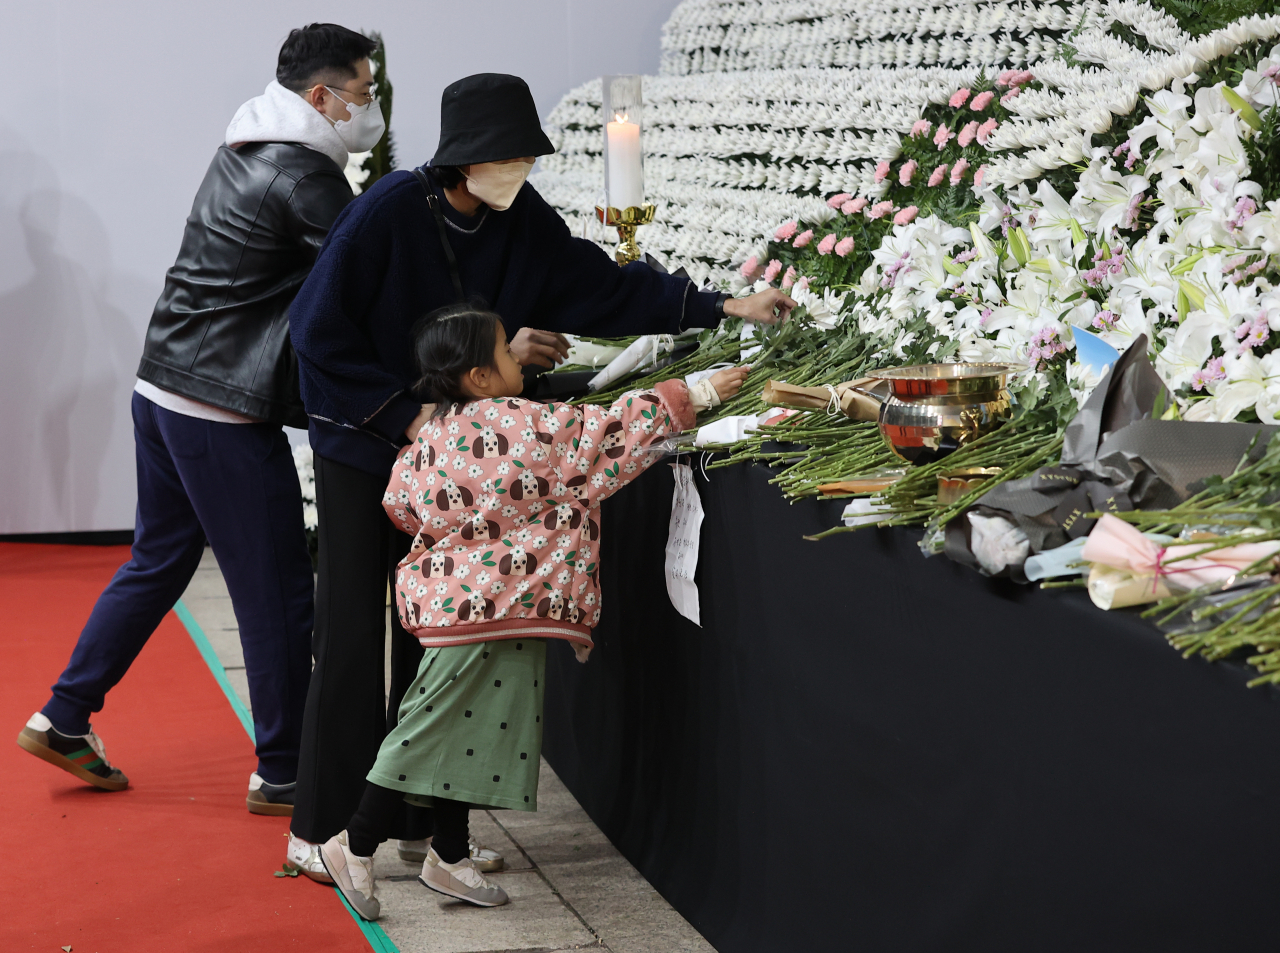 Memorial altar for the victims of the Itaewon tragedy set at Seoul Plaza (Yonhap)